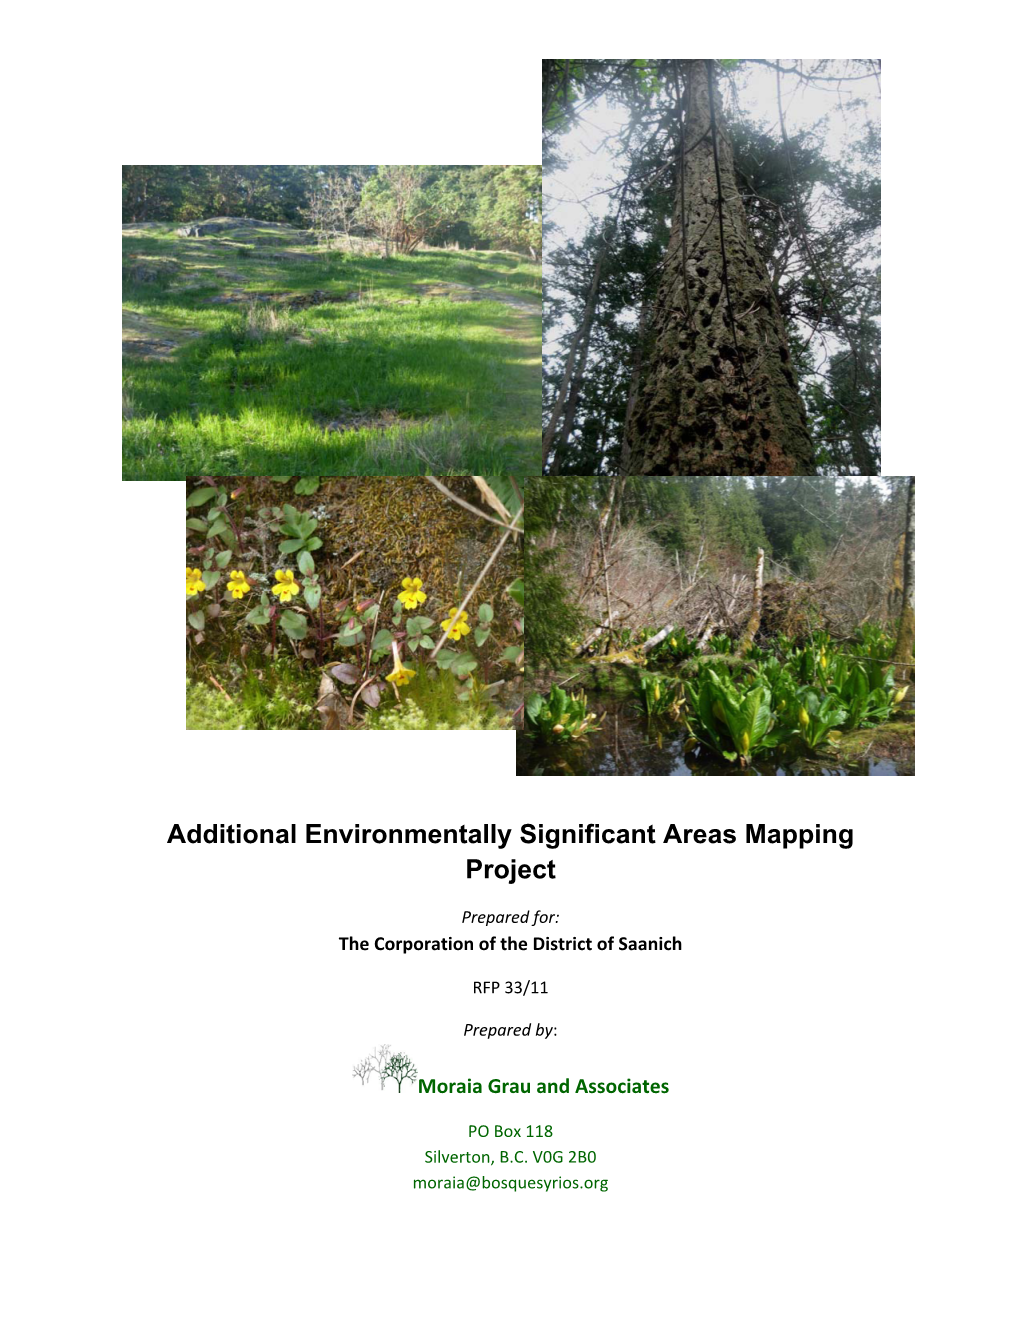 Additional Environmentally Significant Areas Mapping Project